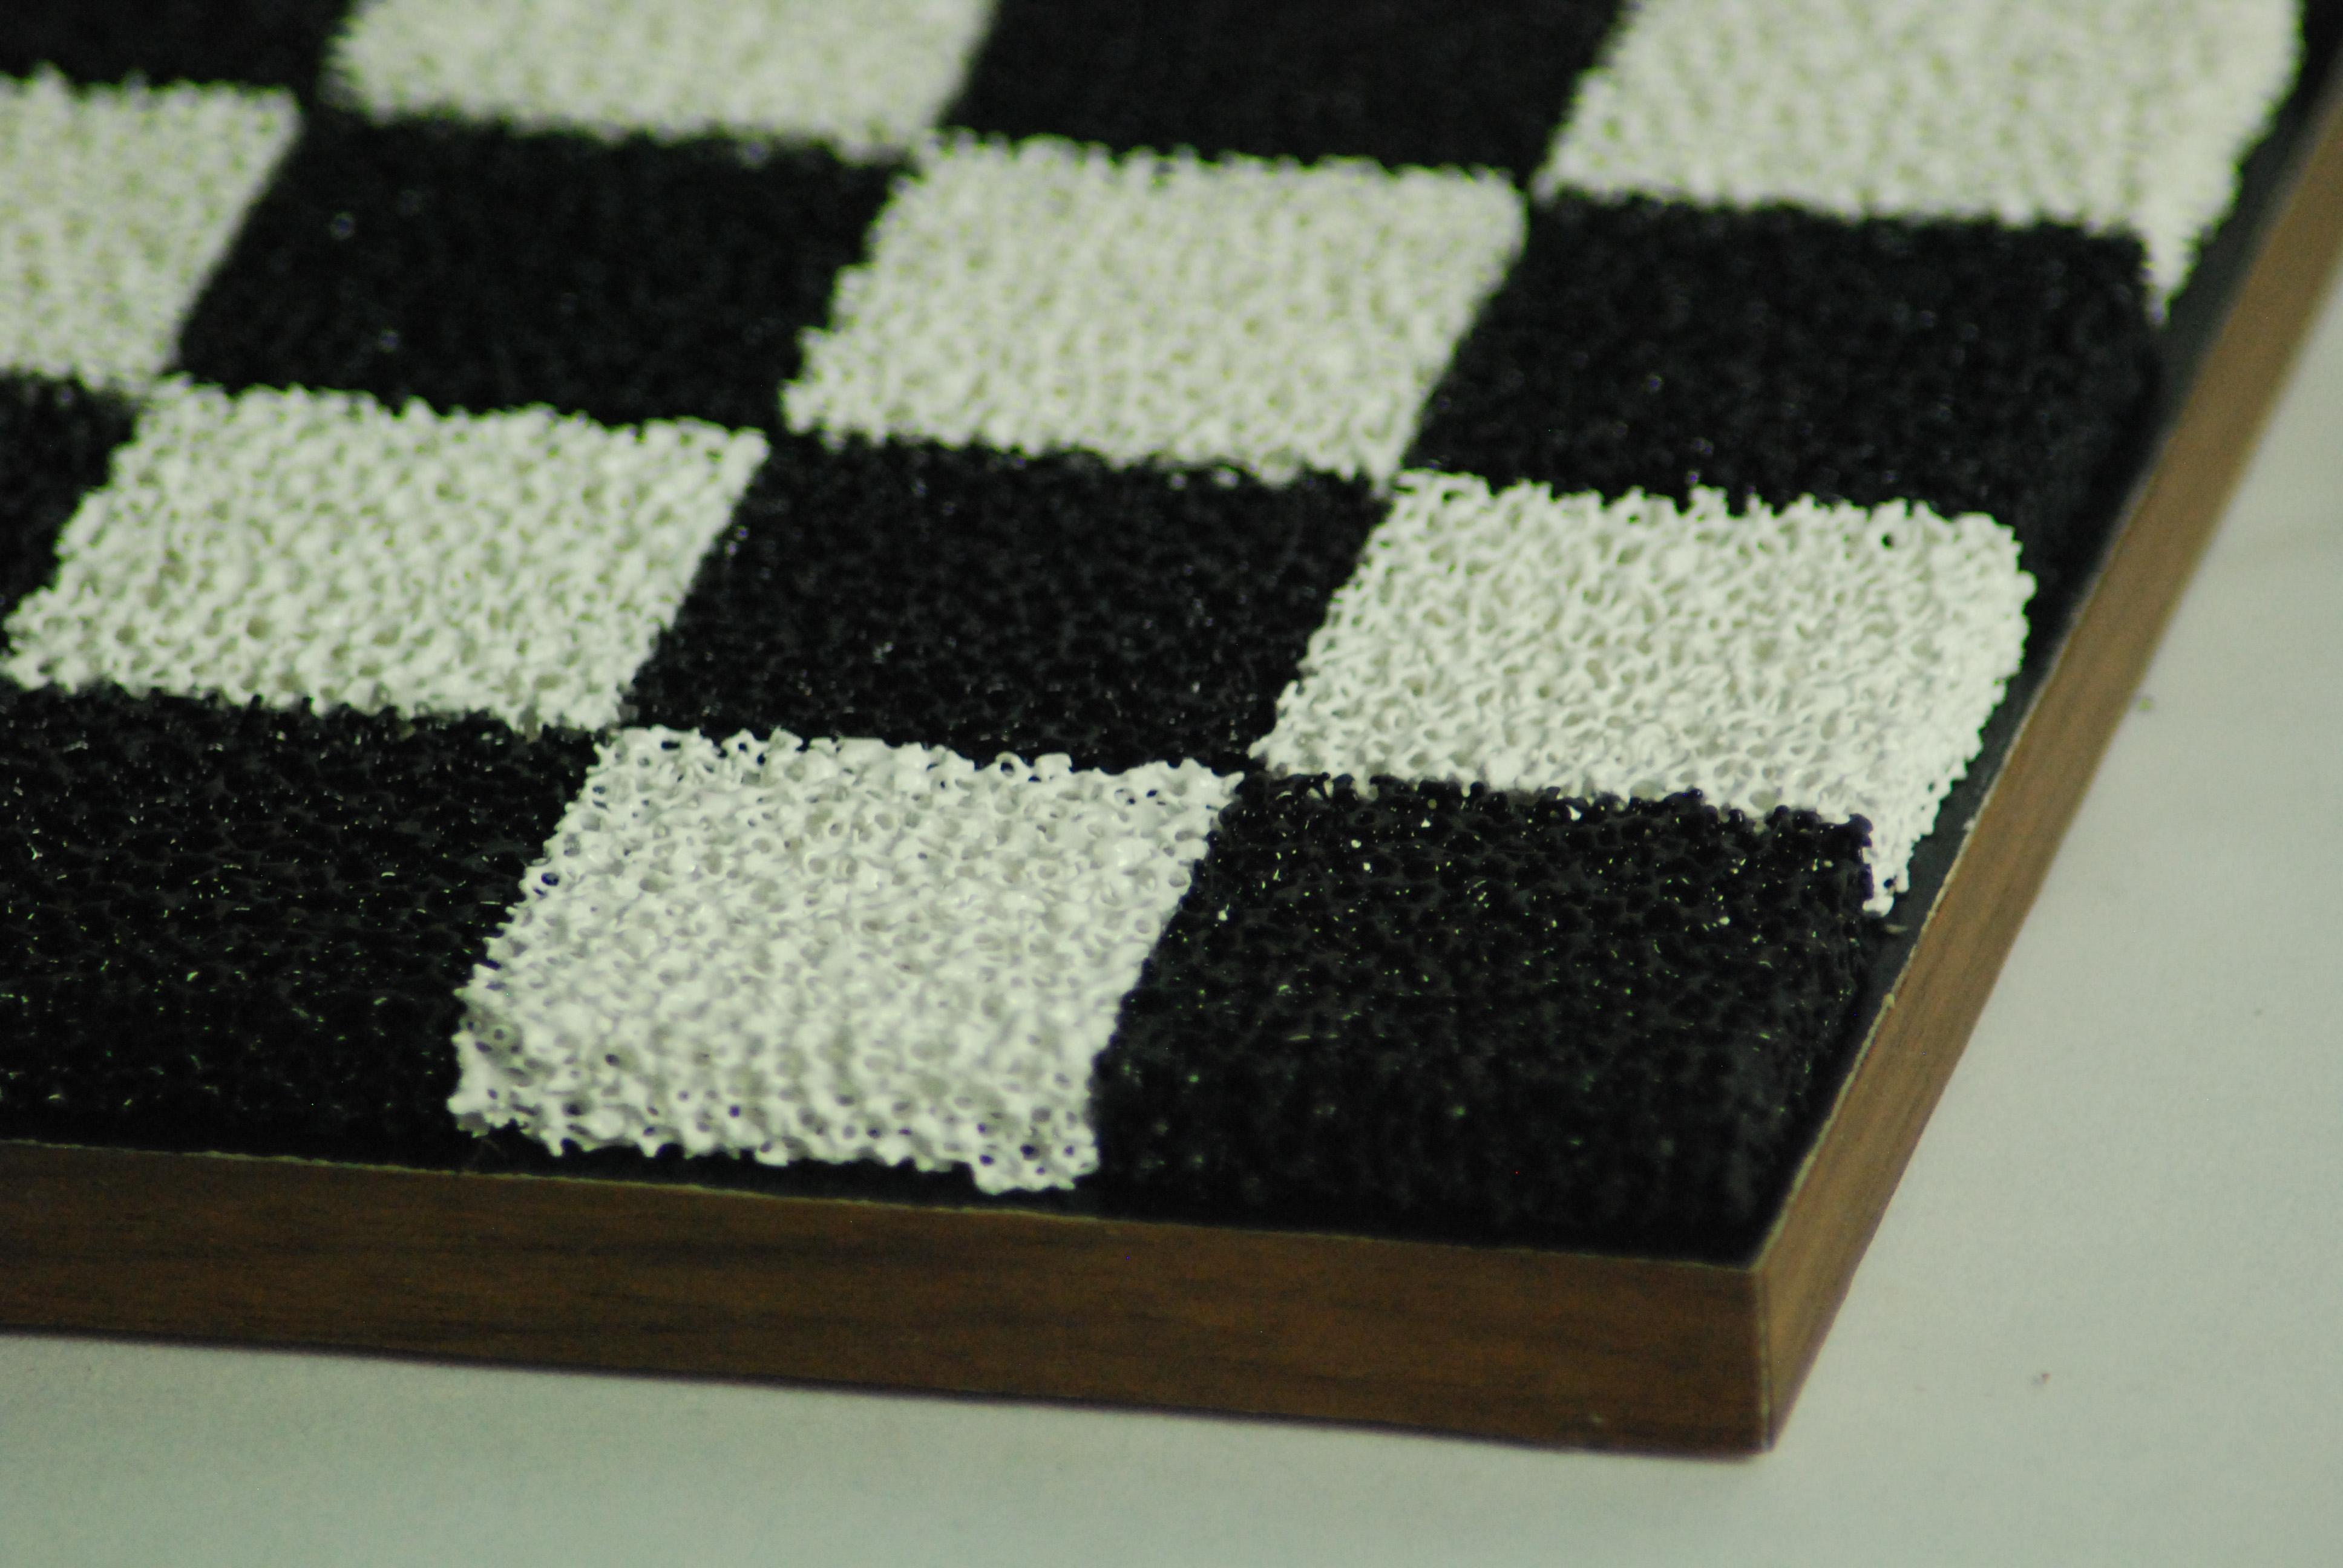 Black + White Porous Ceramic Chess + Checkers Board, Wooden Pieces, Walnut Edge In New Condition For Sale In London, GB